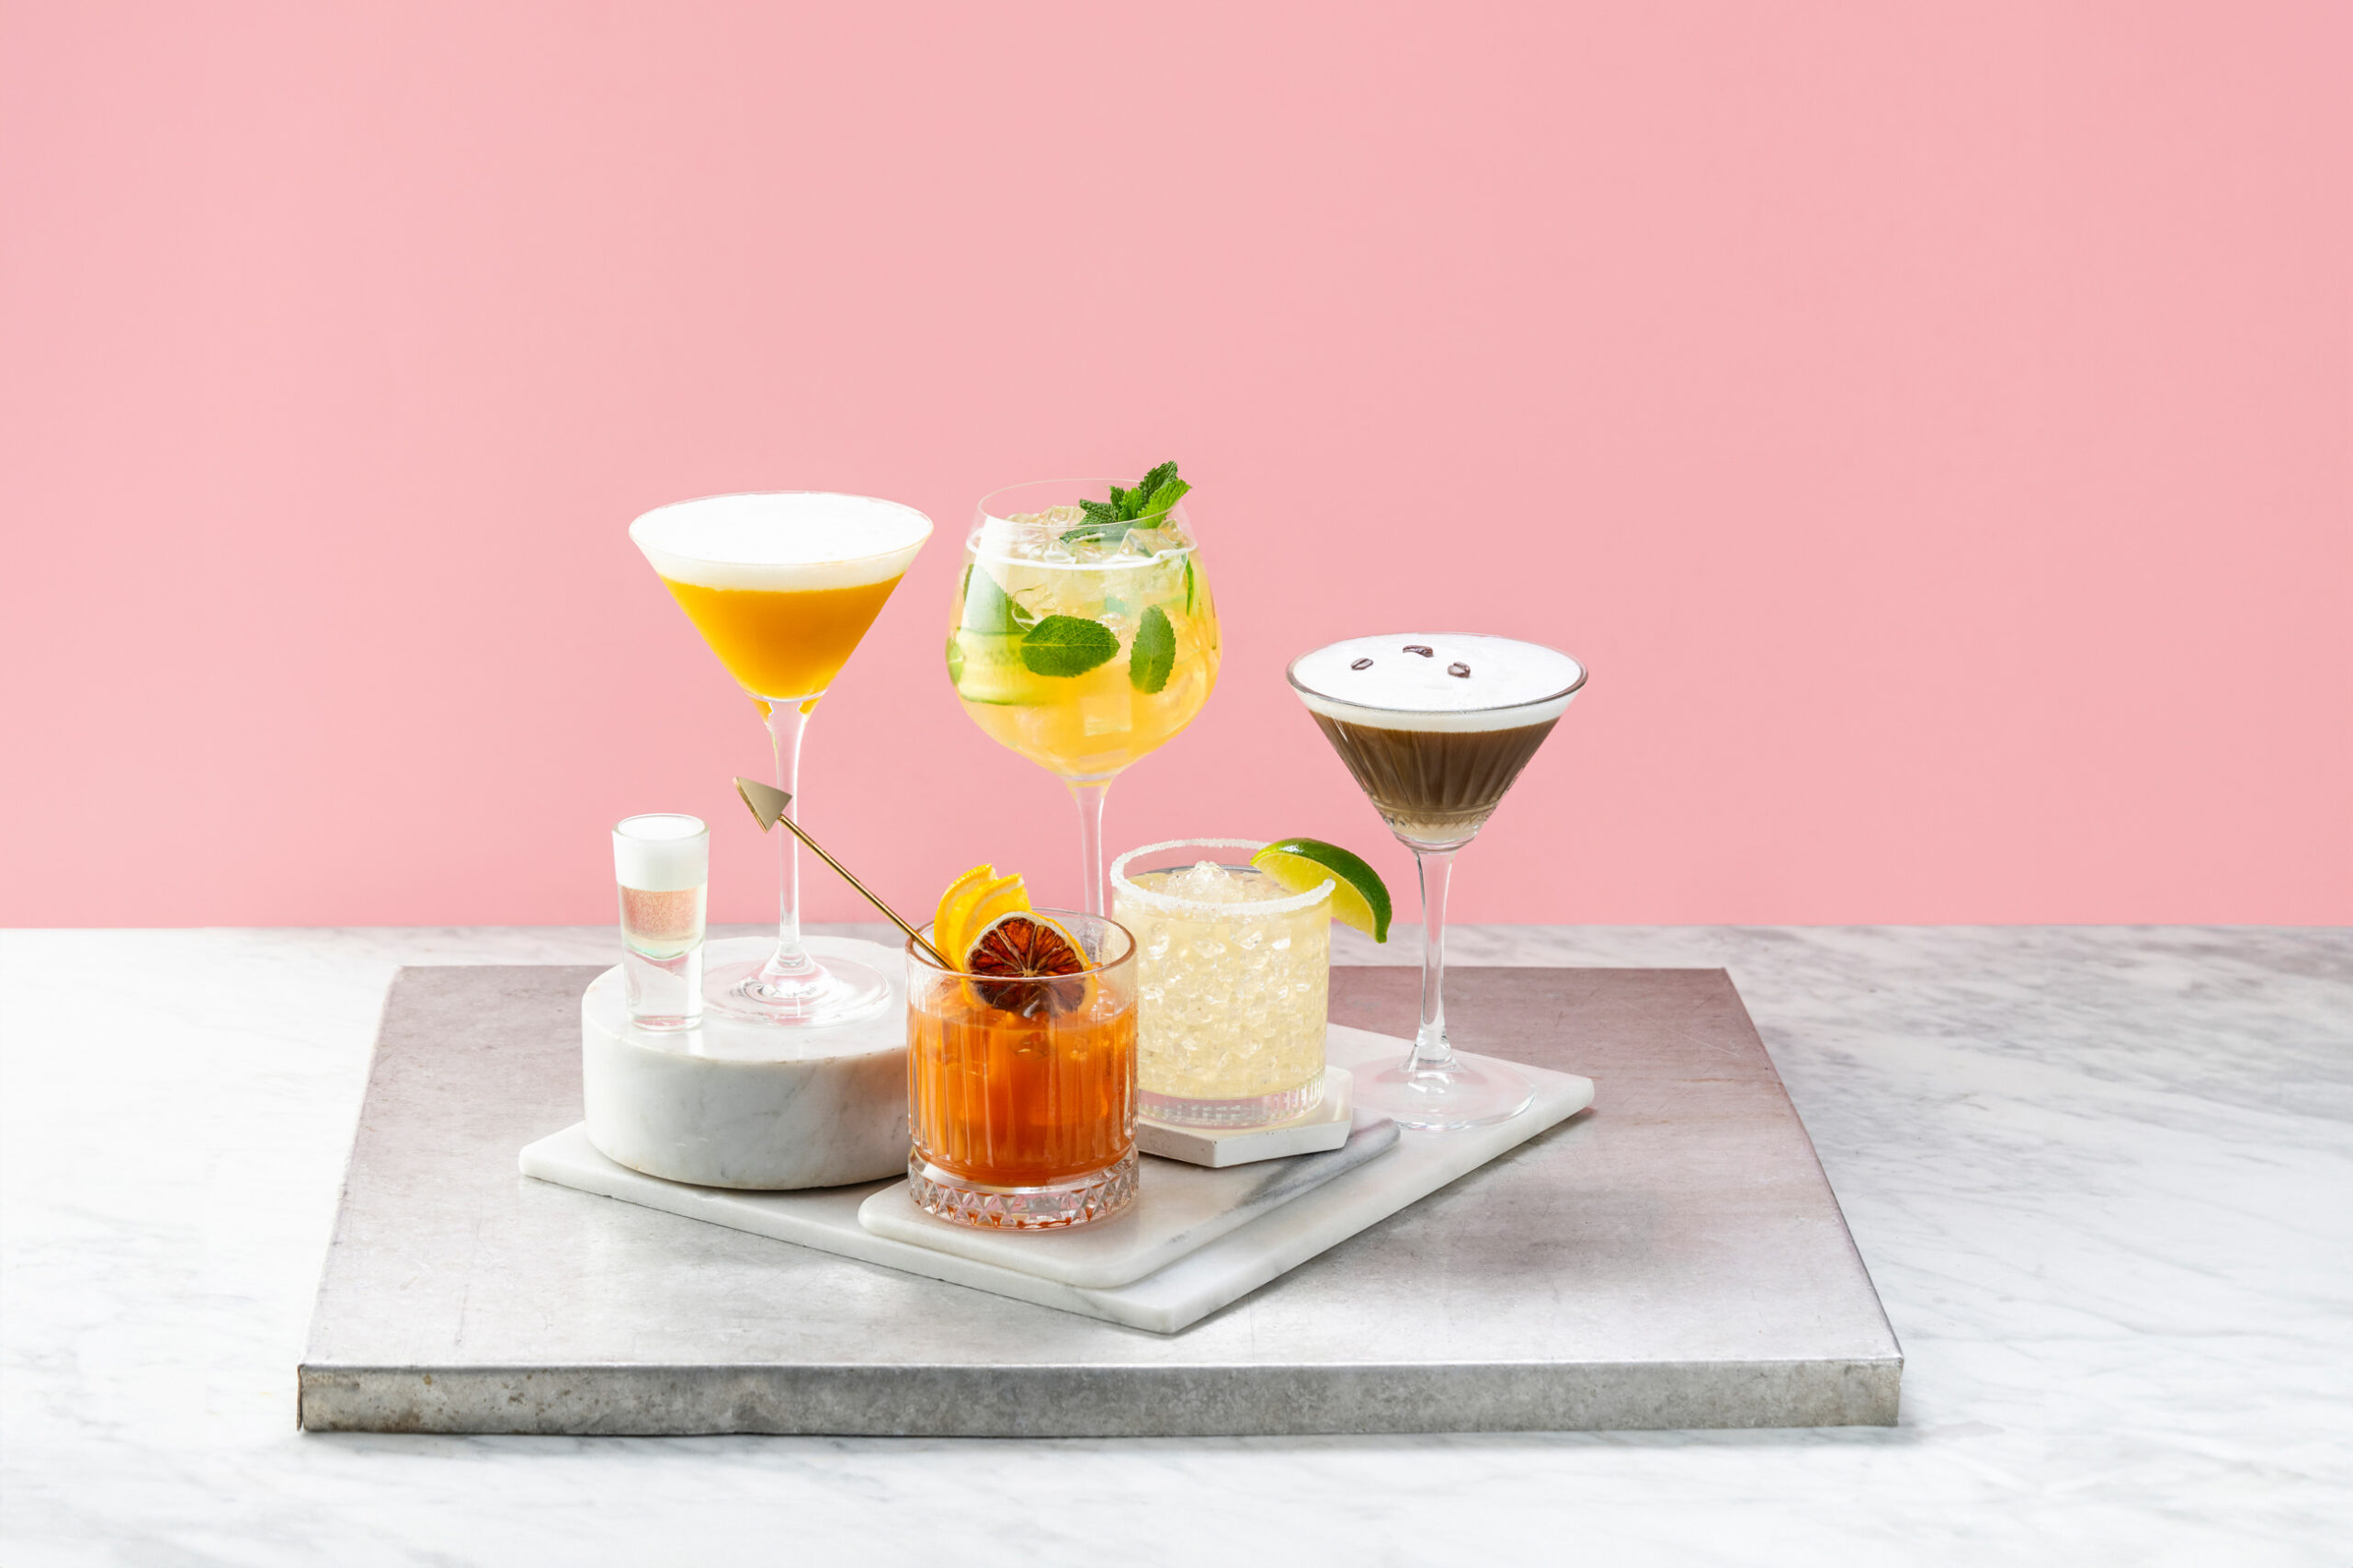 https://www.drakeandmorgan.co.uk/the-anthologist-manchester/wp-content/uploads/2020/07/Cocktail-Grp-002-scaled.jpg